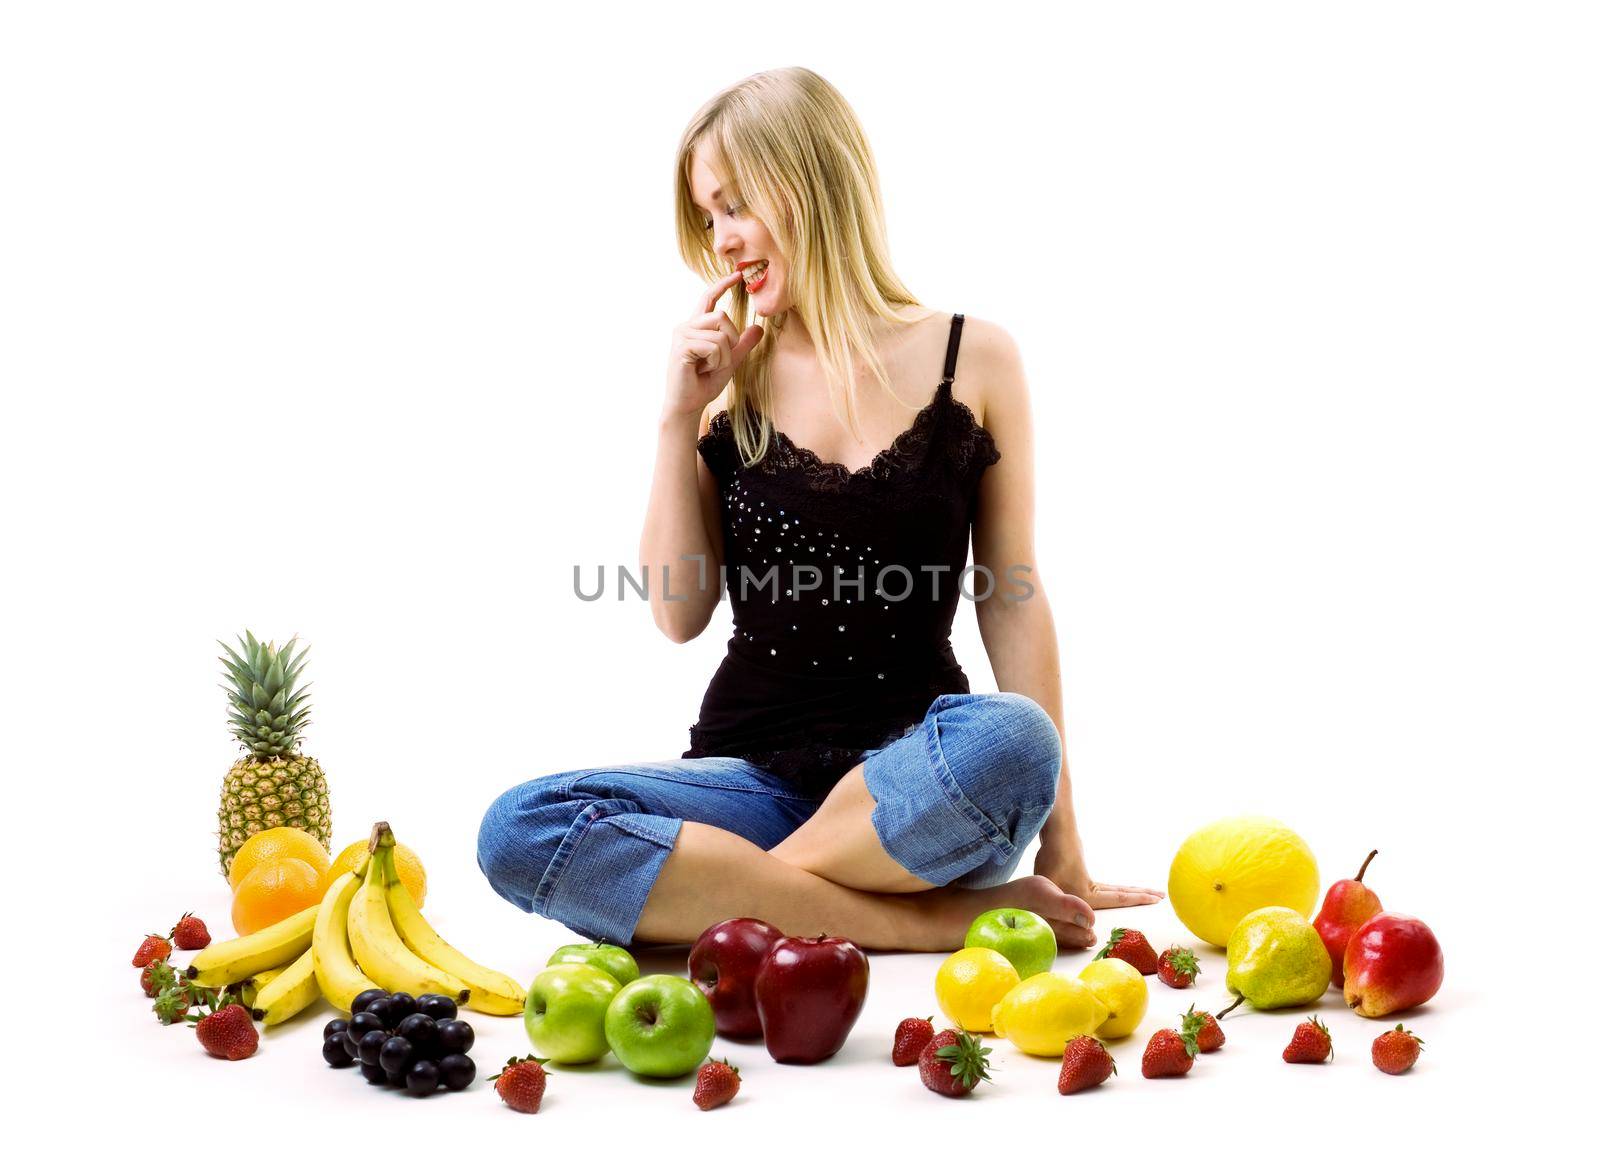 Food, fruit and healthy nutrition - Woman choosing which fruit to eat